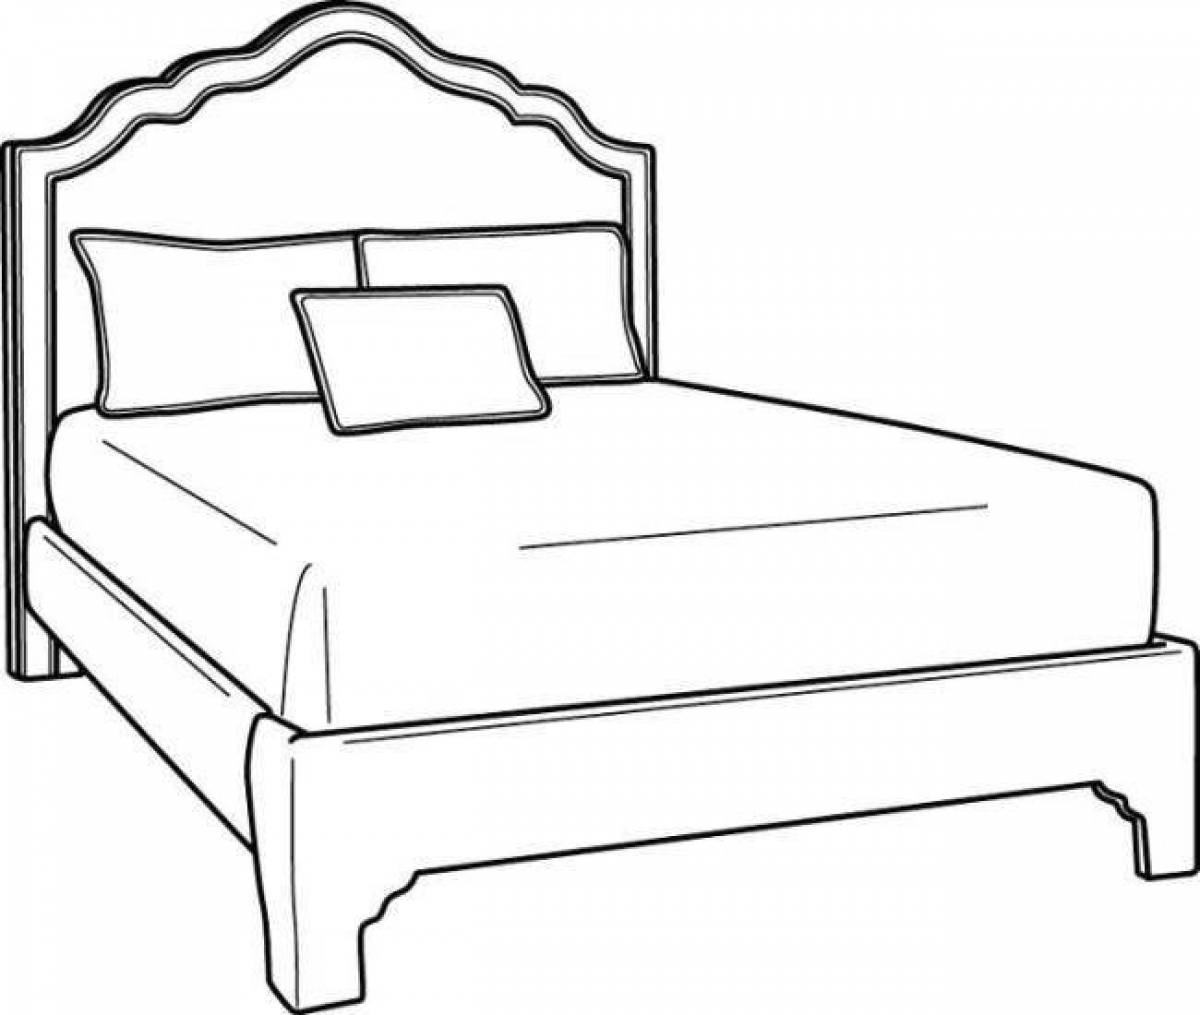 Coloring book shining bed for children